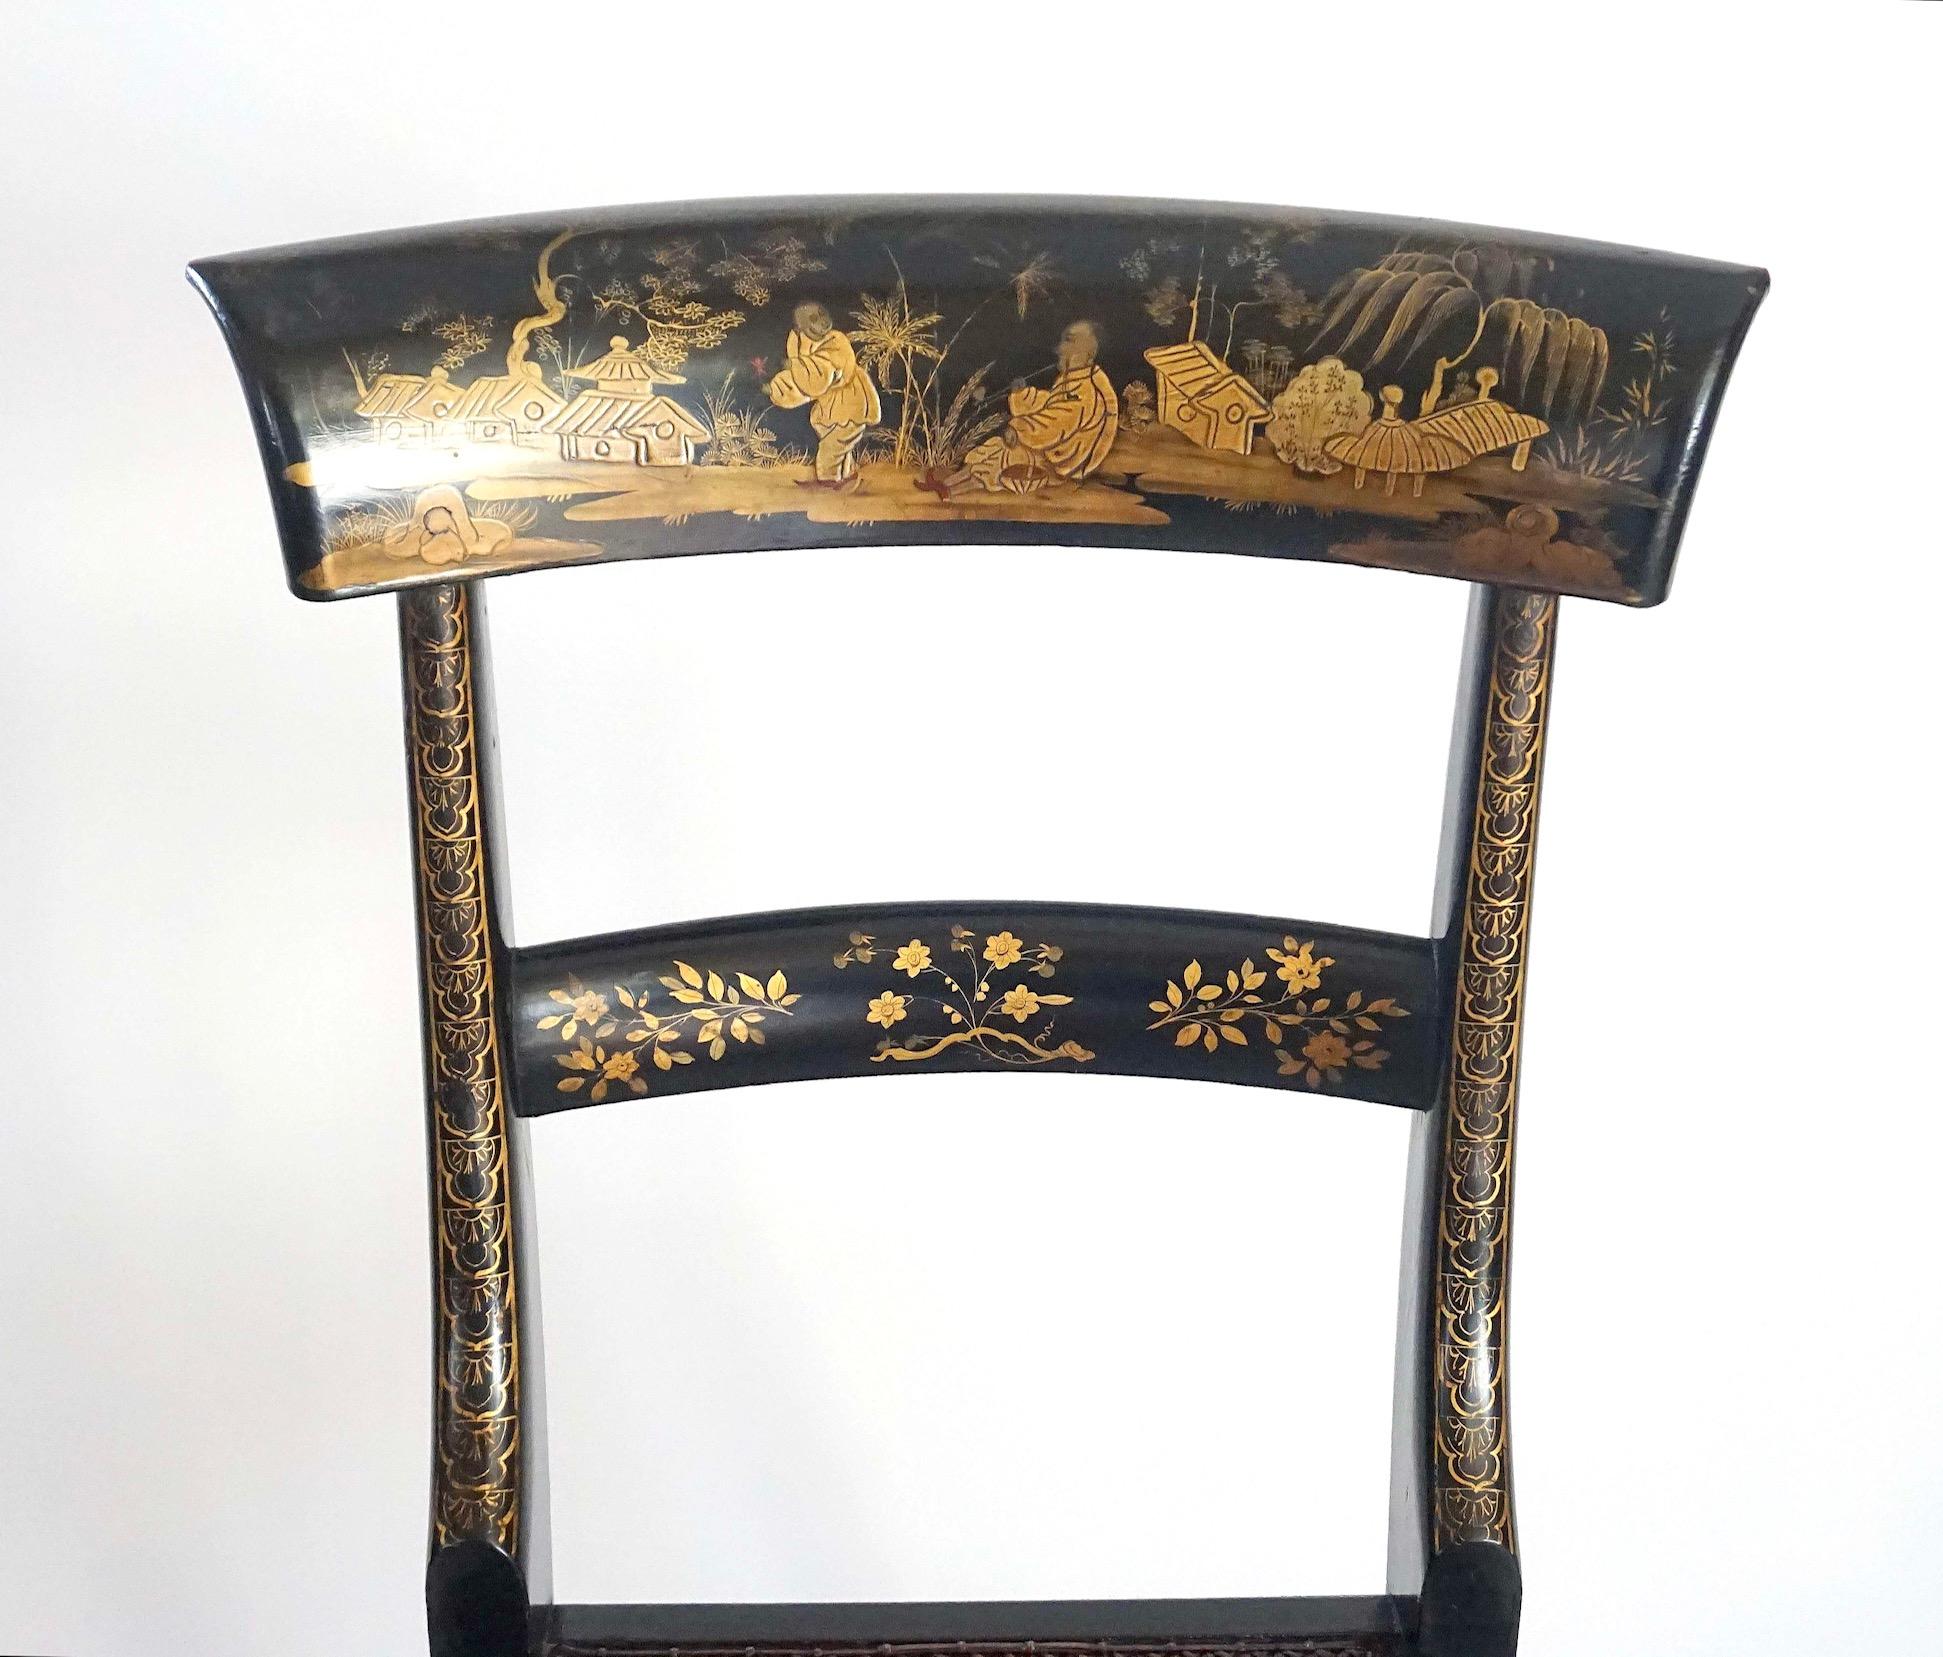 Cane English Chinoiserie Chairs, Ex-Garvan Collection Yale University, circa 1835 For Sale